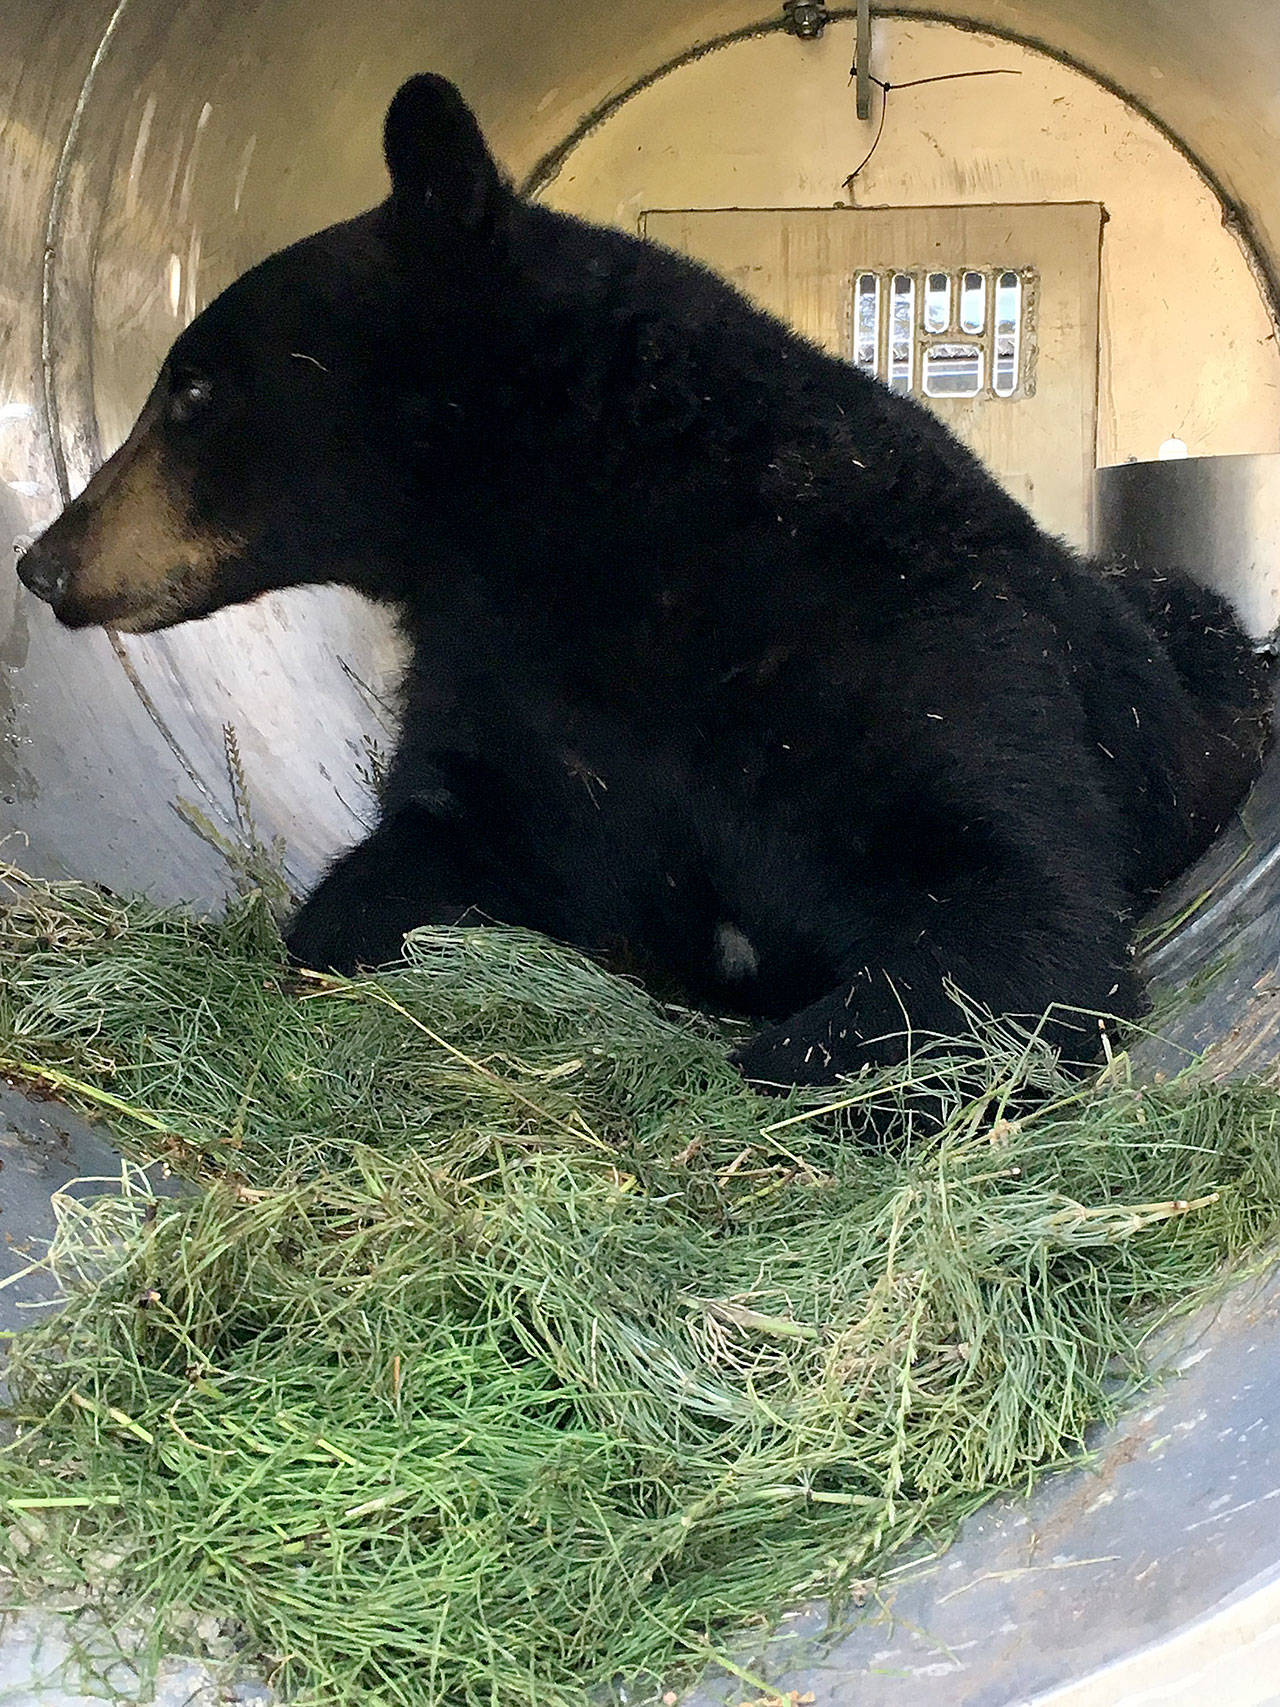 A bear that visited Whidbey before swimming to eight San Juan islands was captured and returned to the wilderness. Fish and Wildlife photo